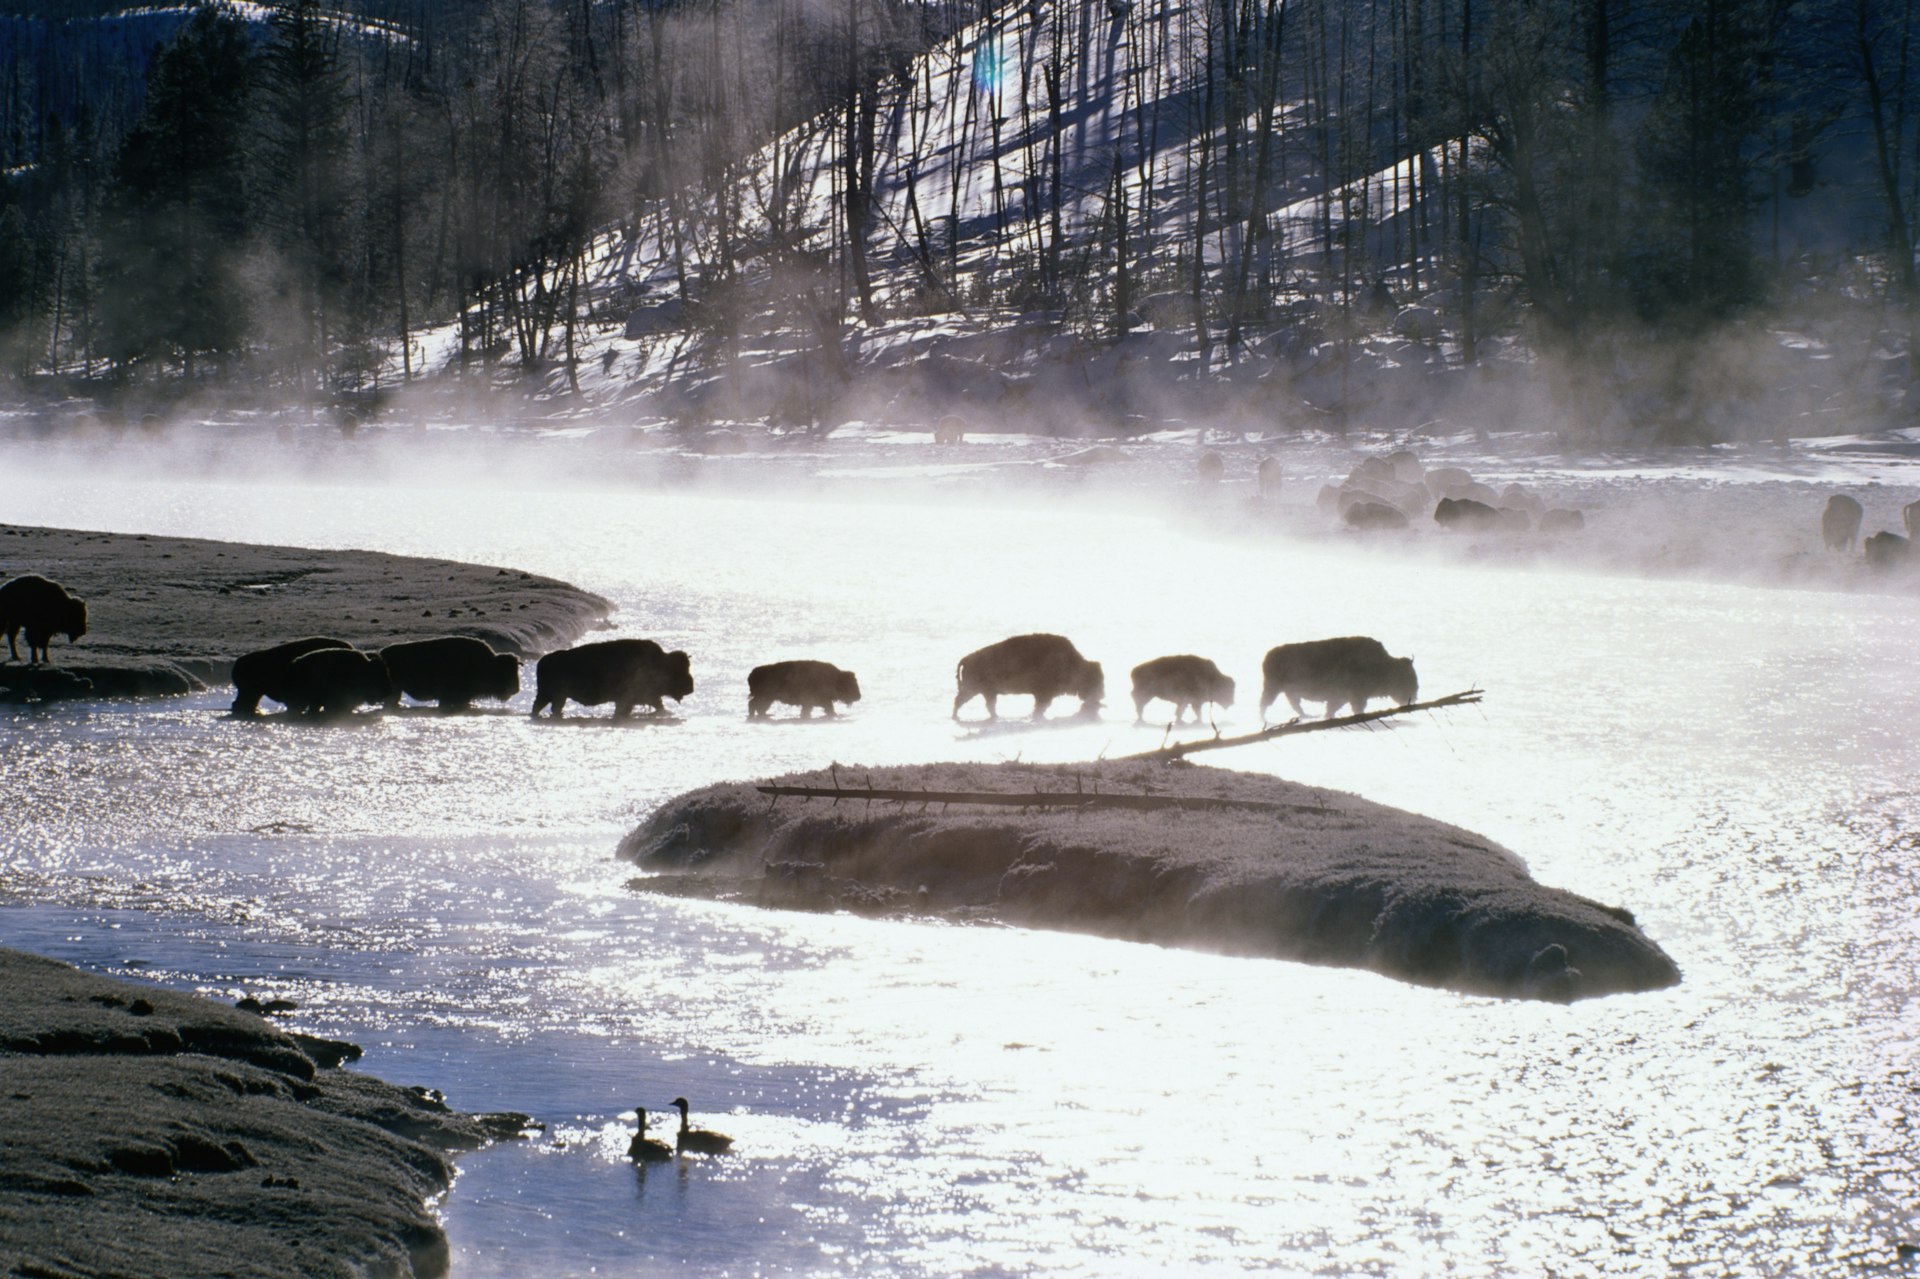 Bison and geese in Yellowstone National Park in winter, Wyoming, The West, USA